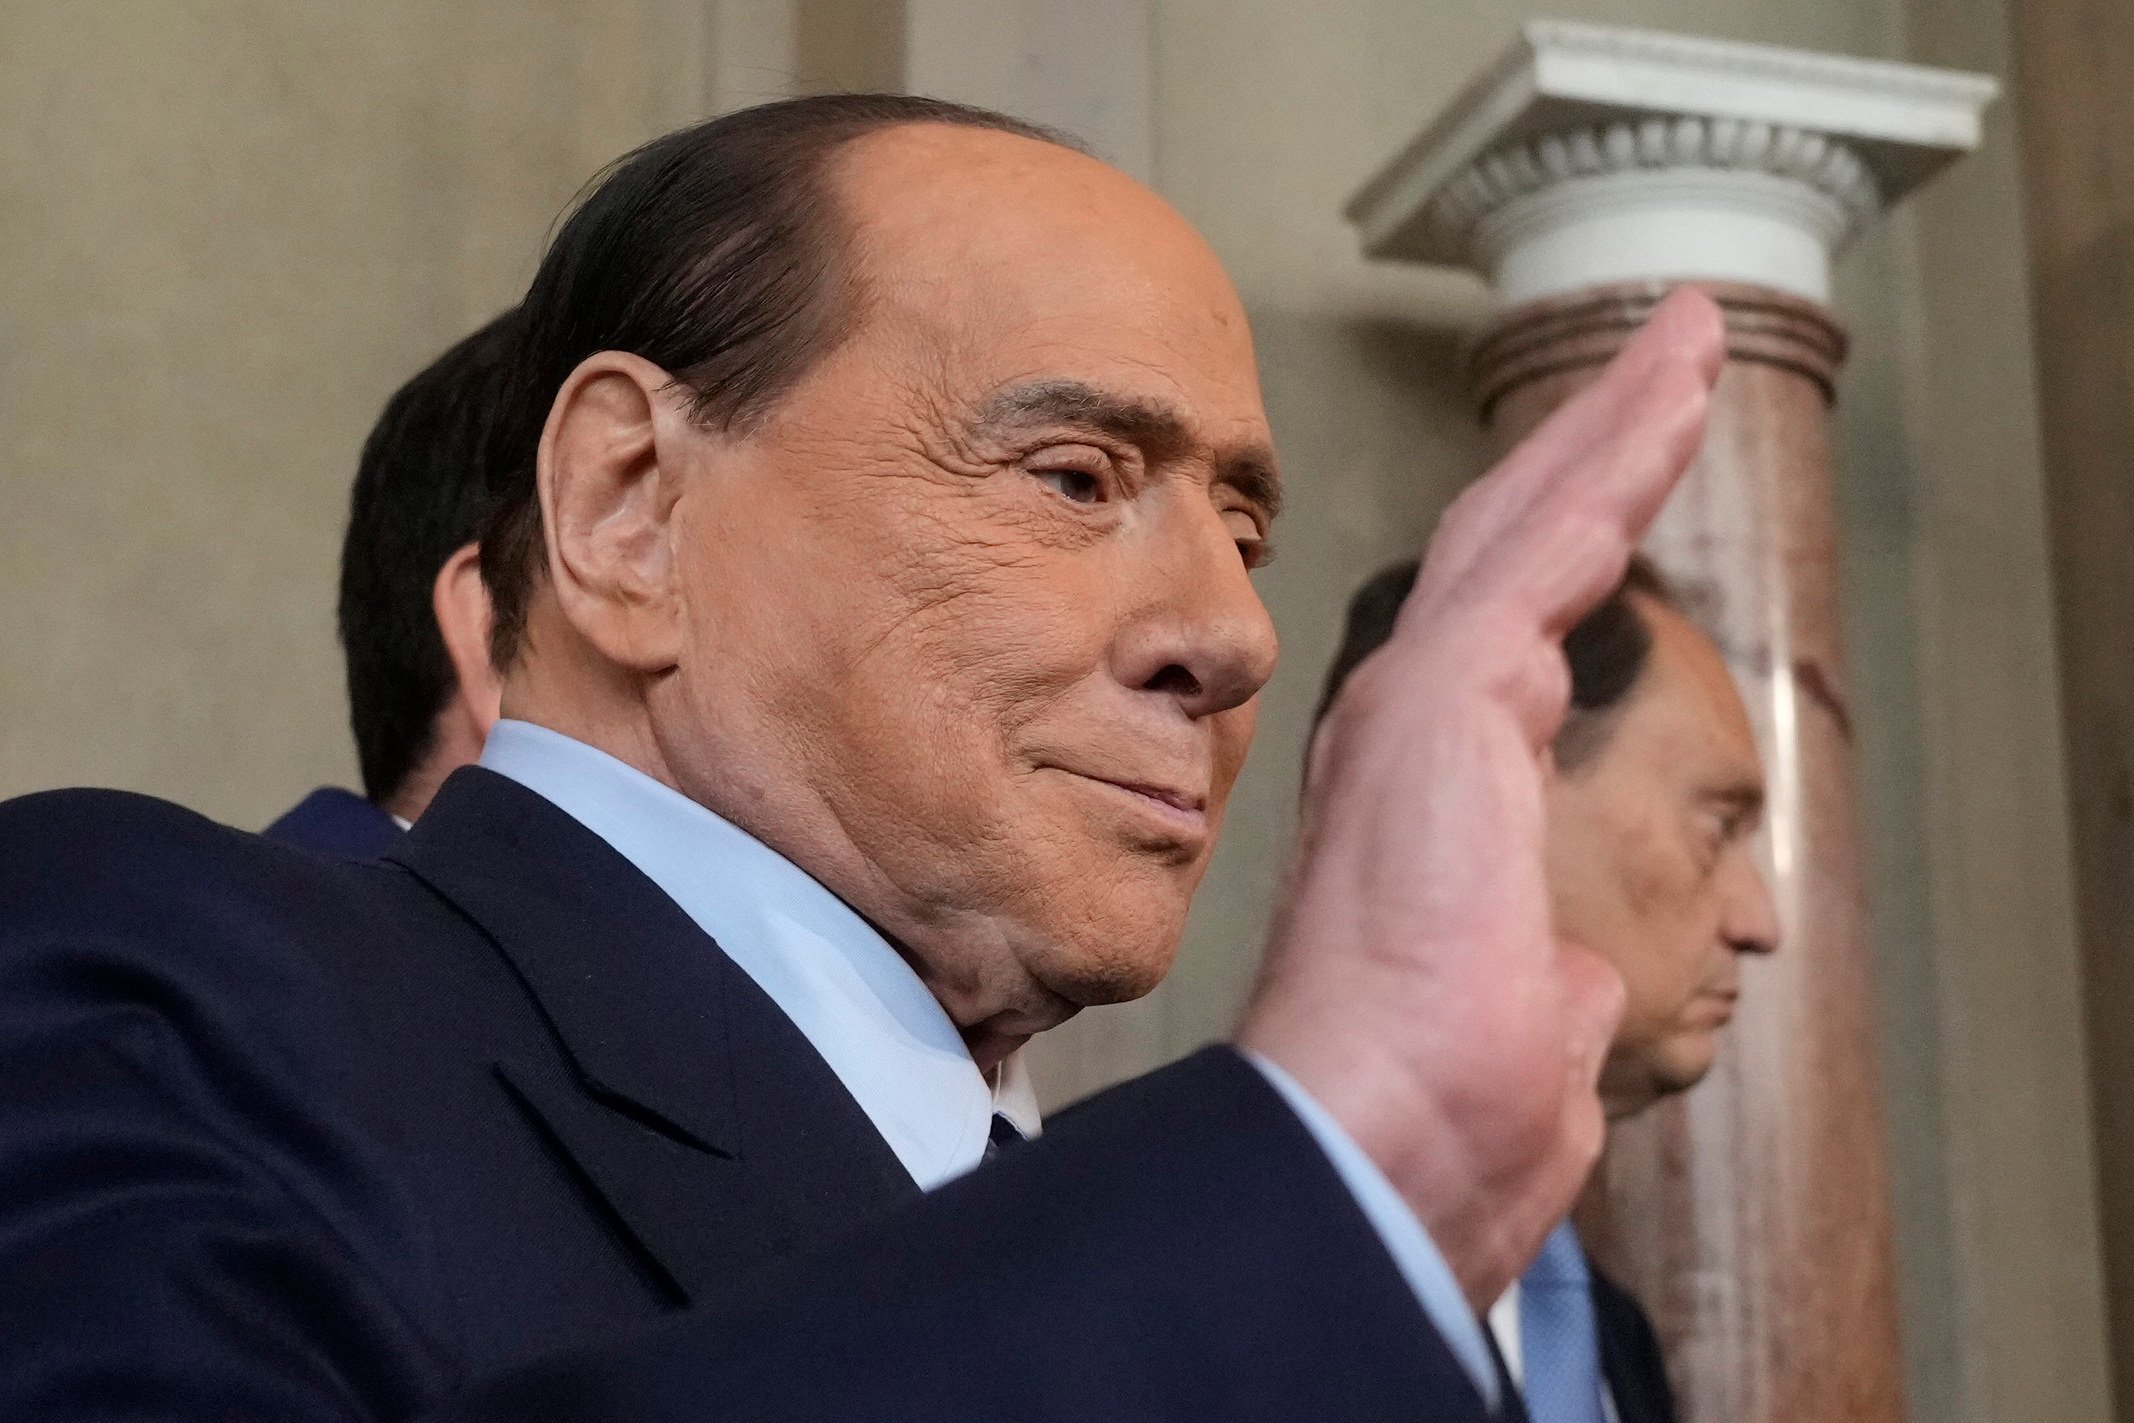 Forza Italia president Silvio Berlusconi “is currently hospitalised at the San Raffaele for scheduled checks related to” his blood cancer. Photo: AP